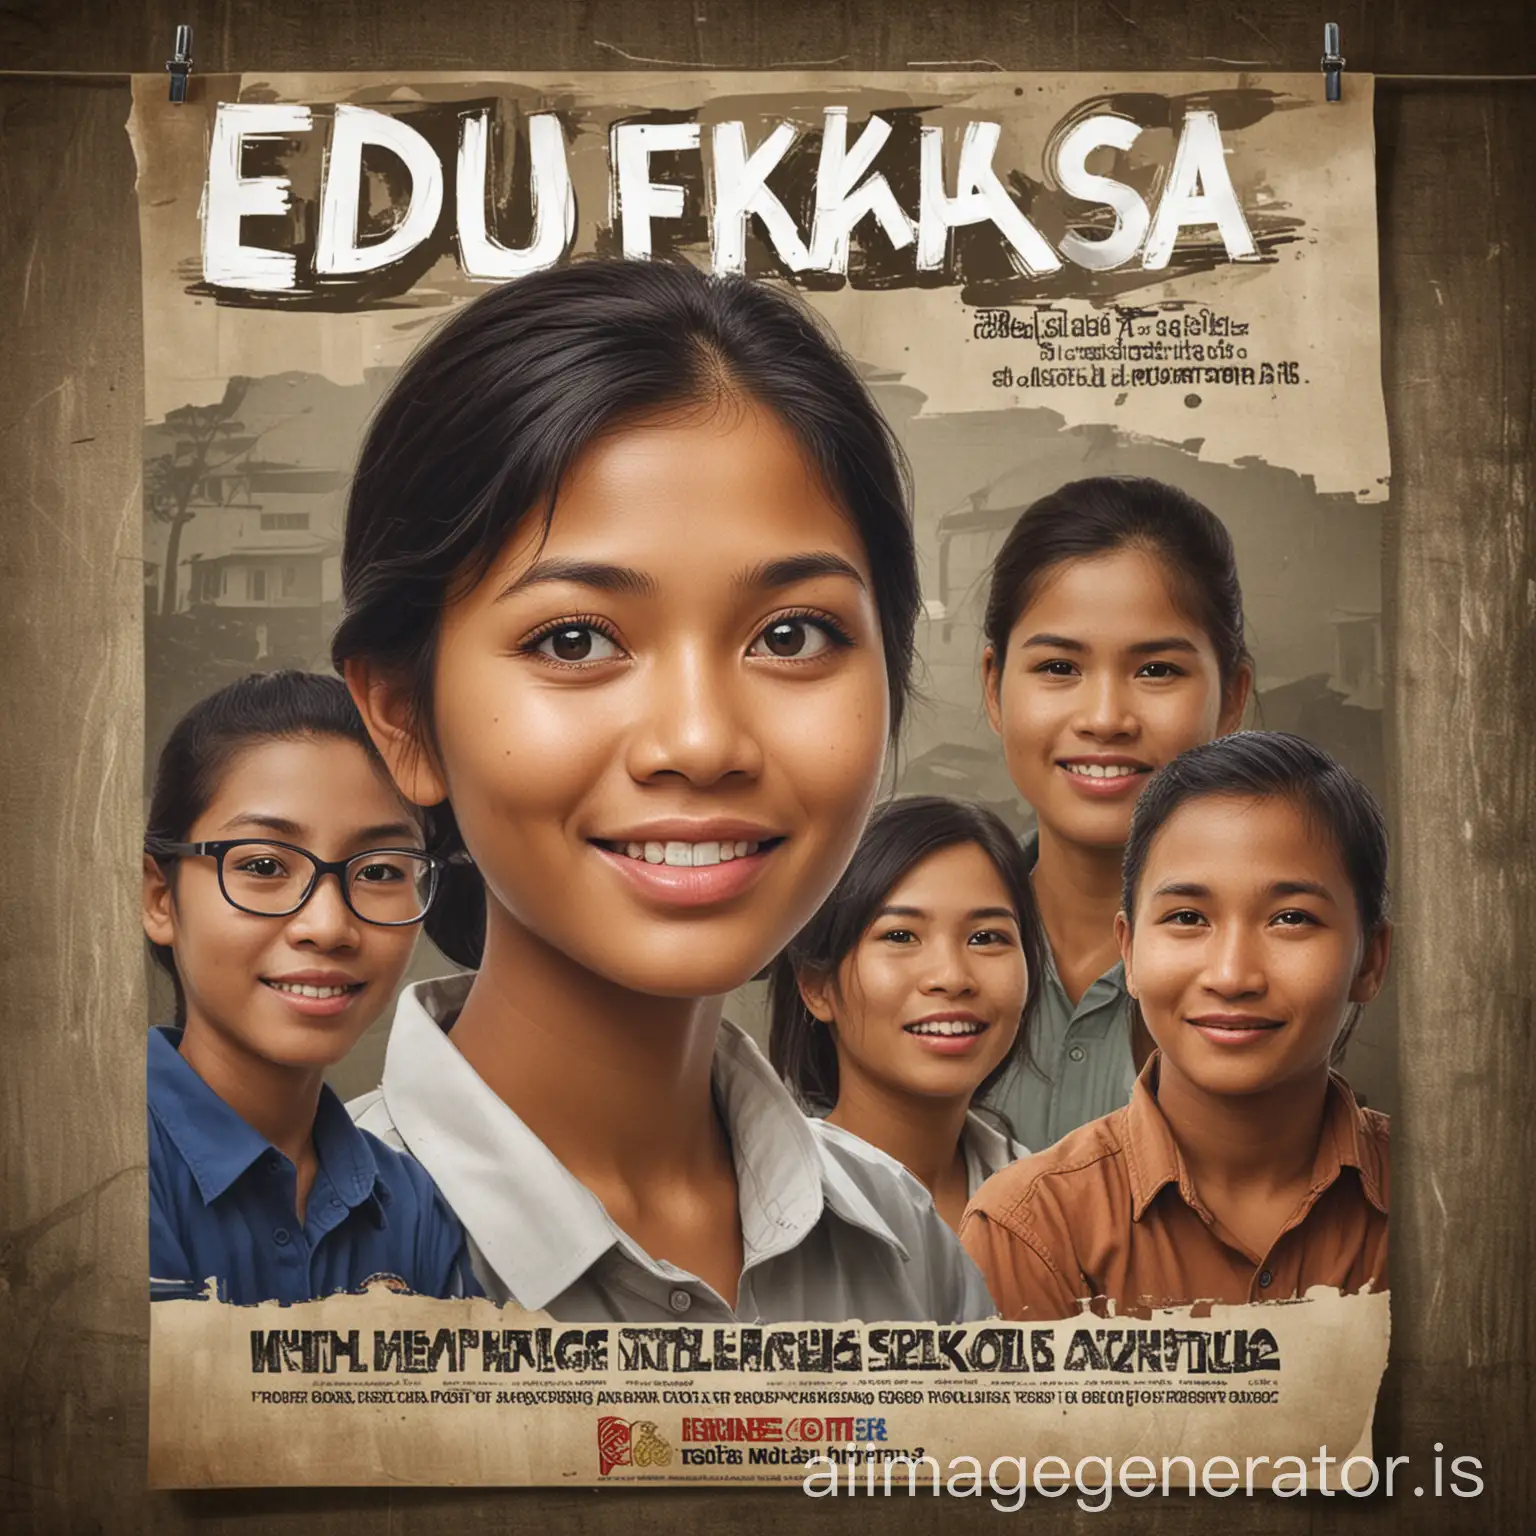 create a campaign poster for our program entitled EDUKHASA. The program aims to help the illiterate people of the barangay by educating them on the fundamentals of school and helping them to be prepared for the continuous upskilling through the program of Technical Education and Skills Development Authority (TESDA).